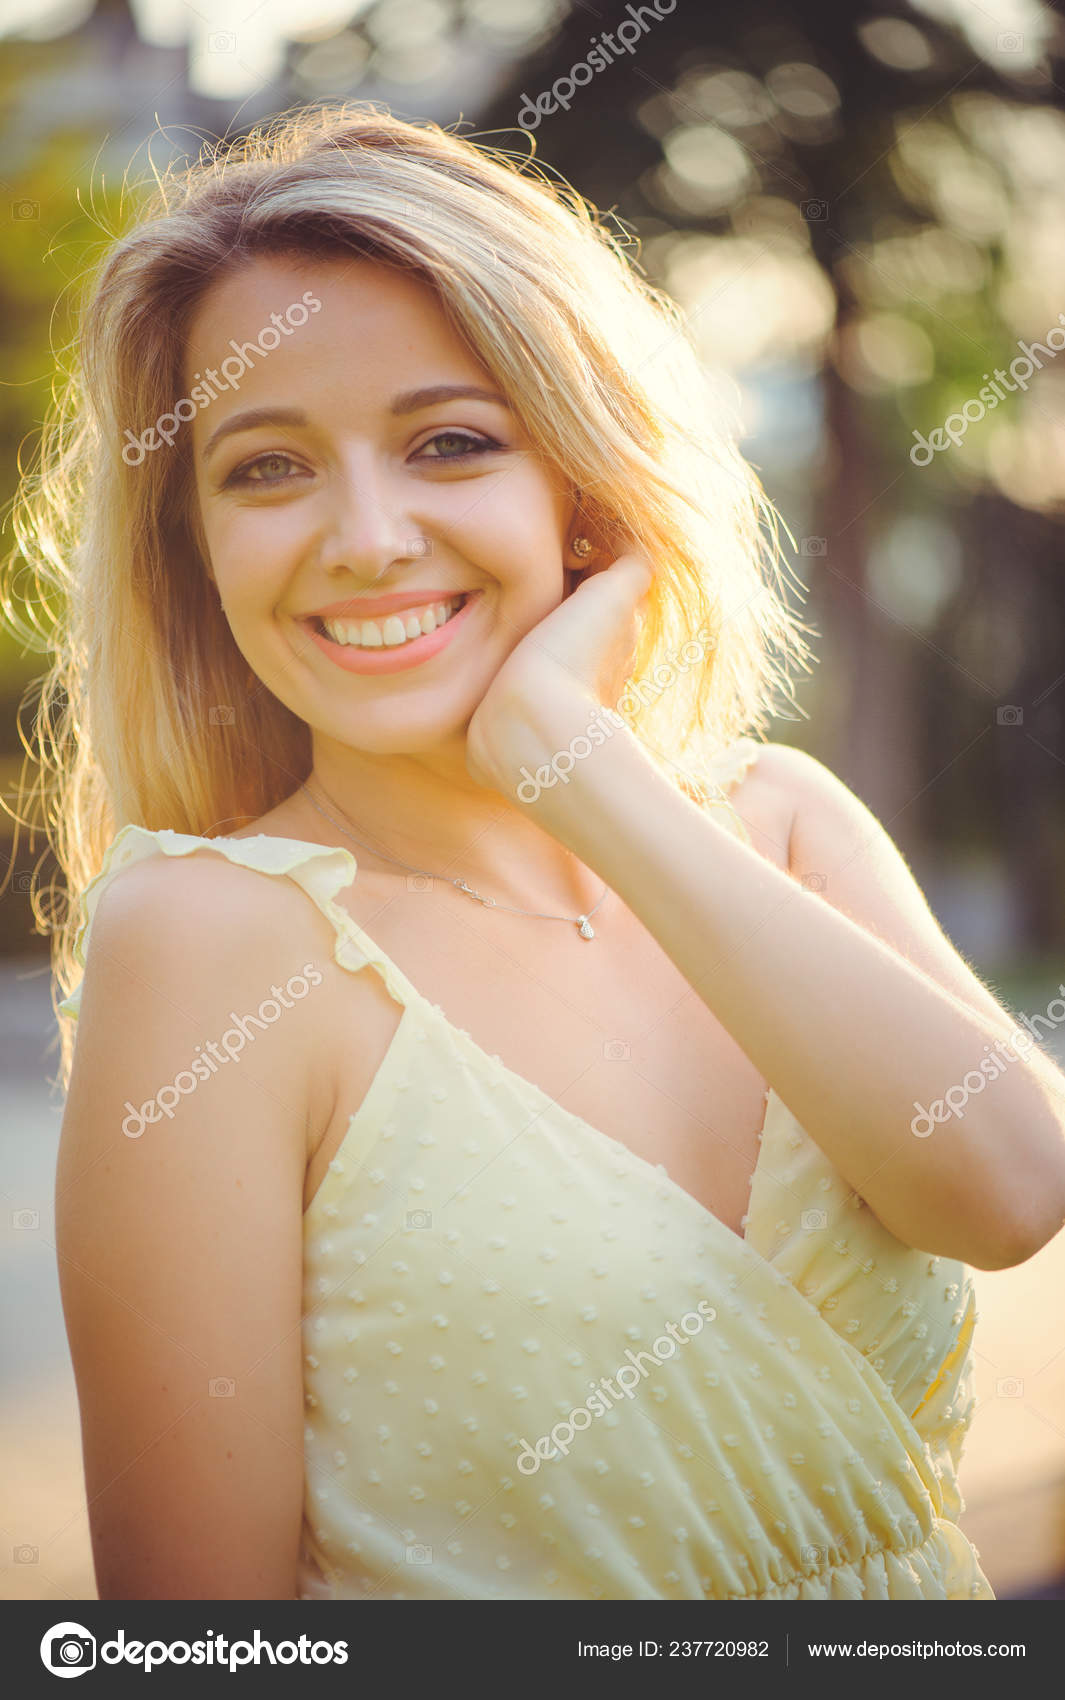 Premium Photo  Beautiful happy woman with a smile and stylish